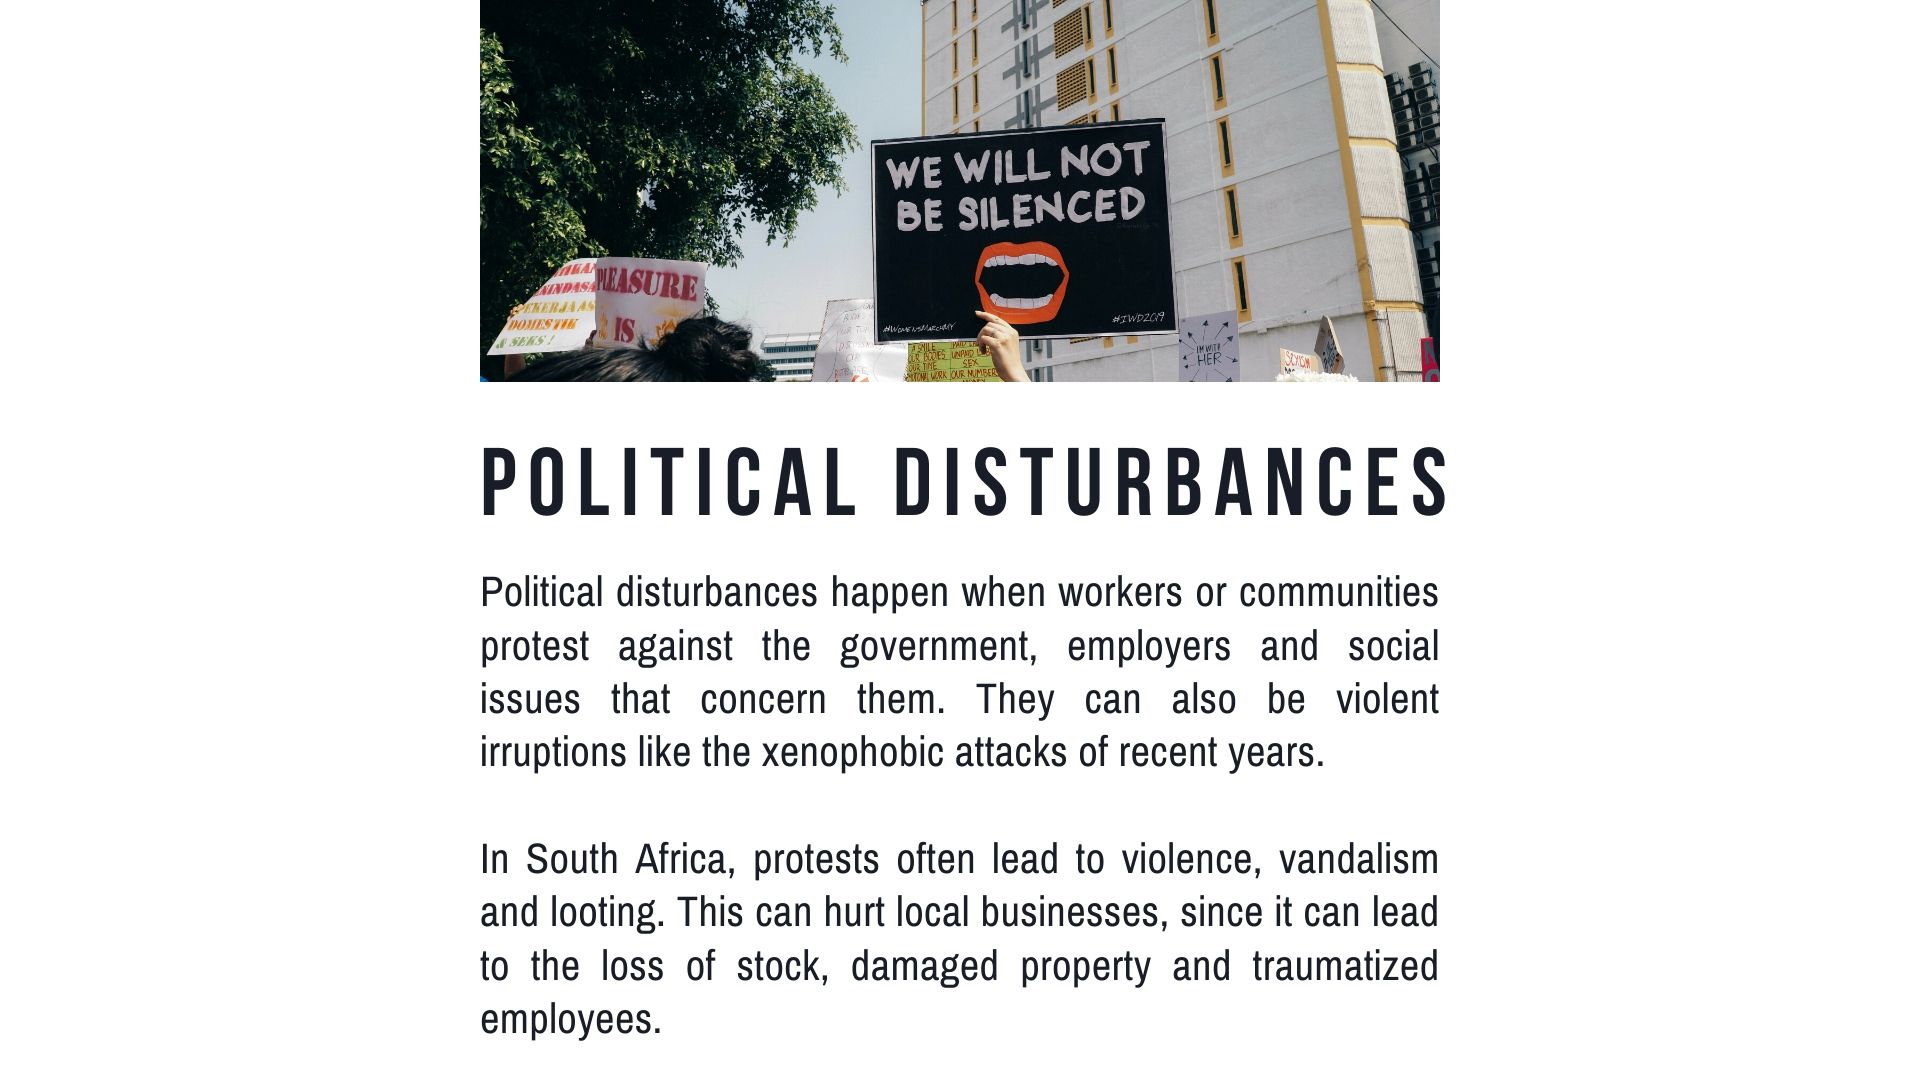 List of South African Contemporary Socio-Economic Issues - Definition and explanation of political disturbances